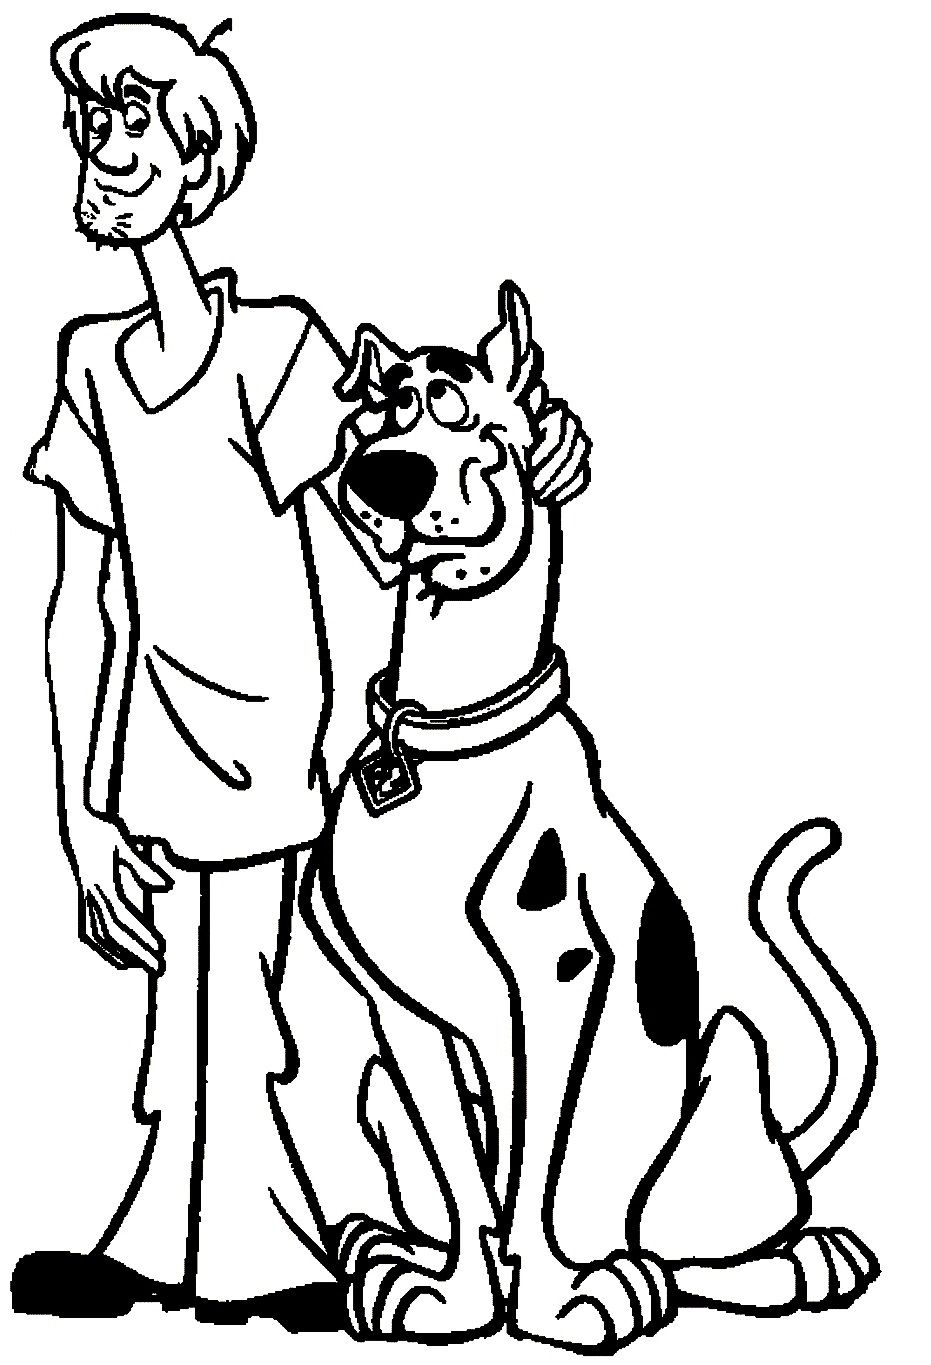 Scooby Doo Outline | Free download on ClipArtMag